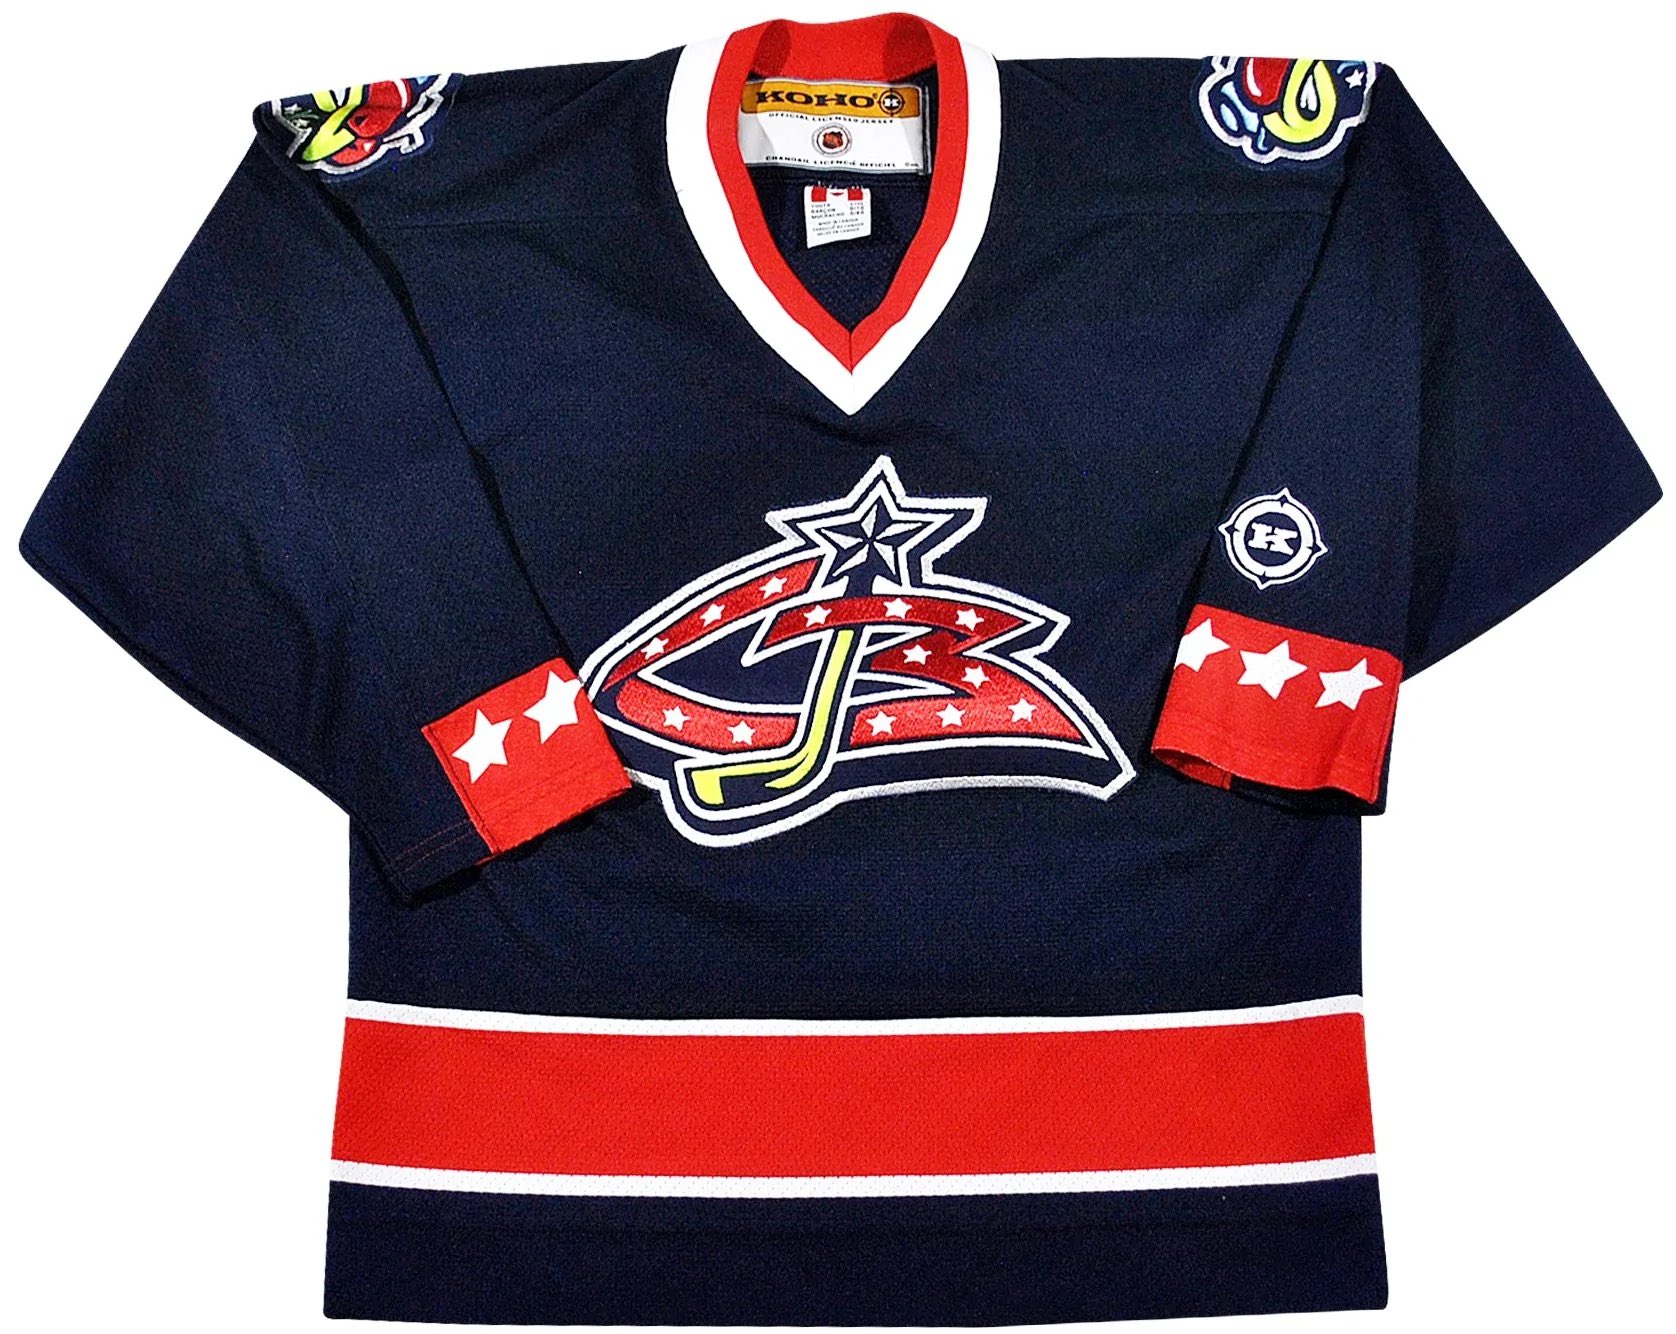 icethetics on X: The #CBJ #ReverseRetro is the latest to leak!  Confirmation of the 2003 era third jersey with black and blue swapped.  Thanks to @capersinodj for the heads up on the